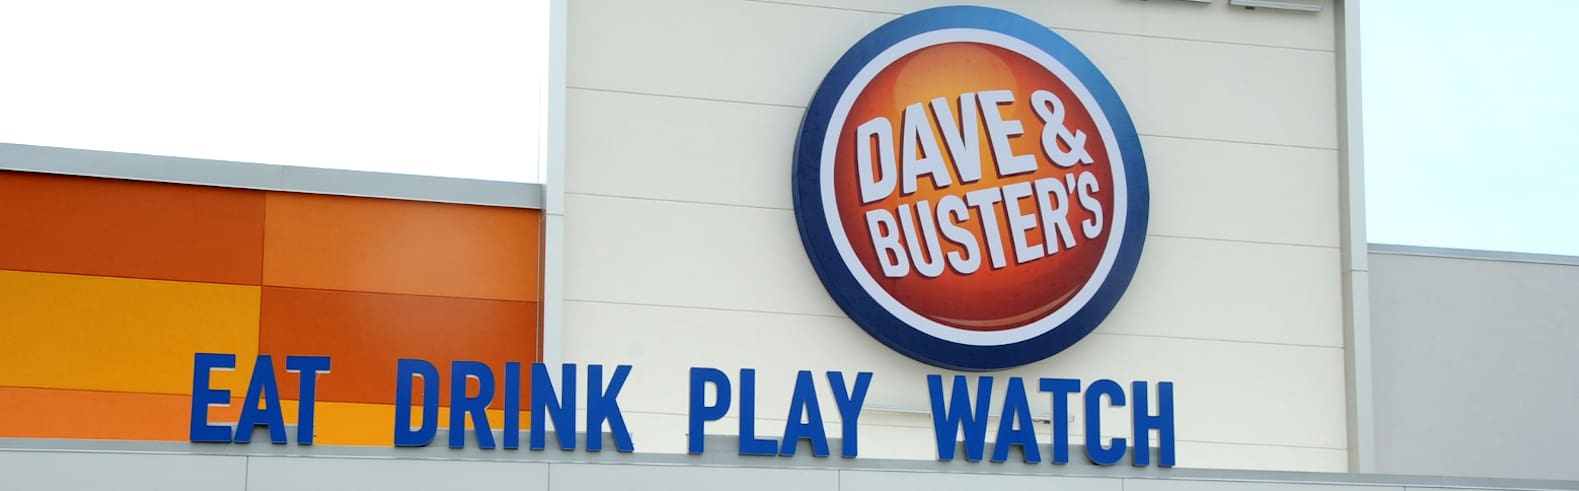 Dave and Busters Sign at Hamilton Place Mall in Chattanooga, TN